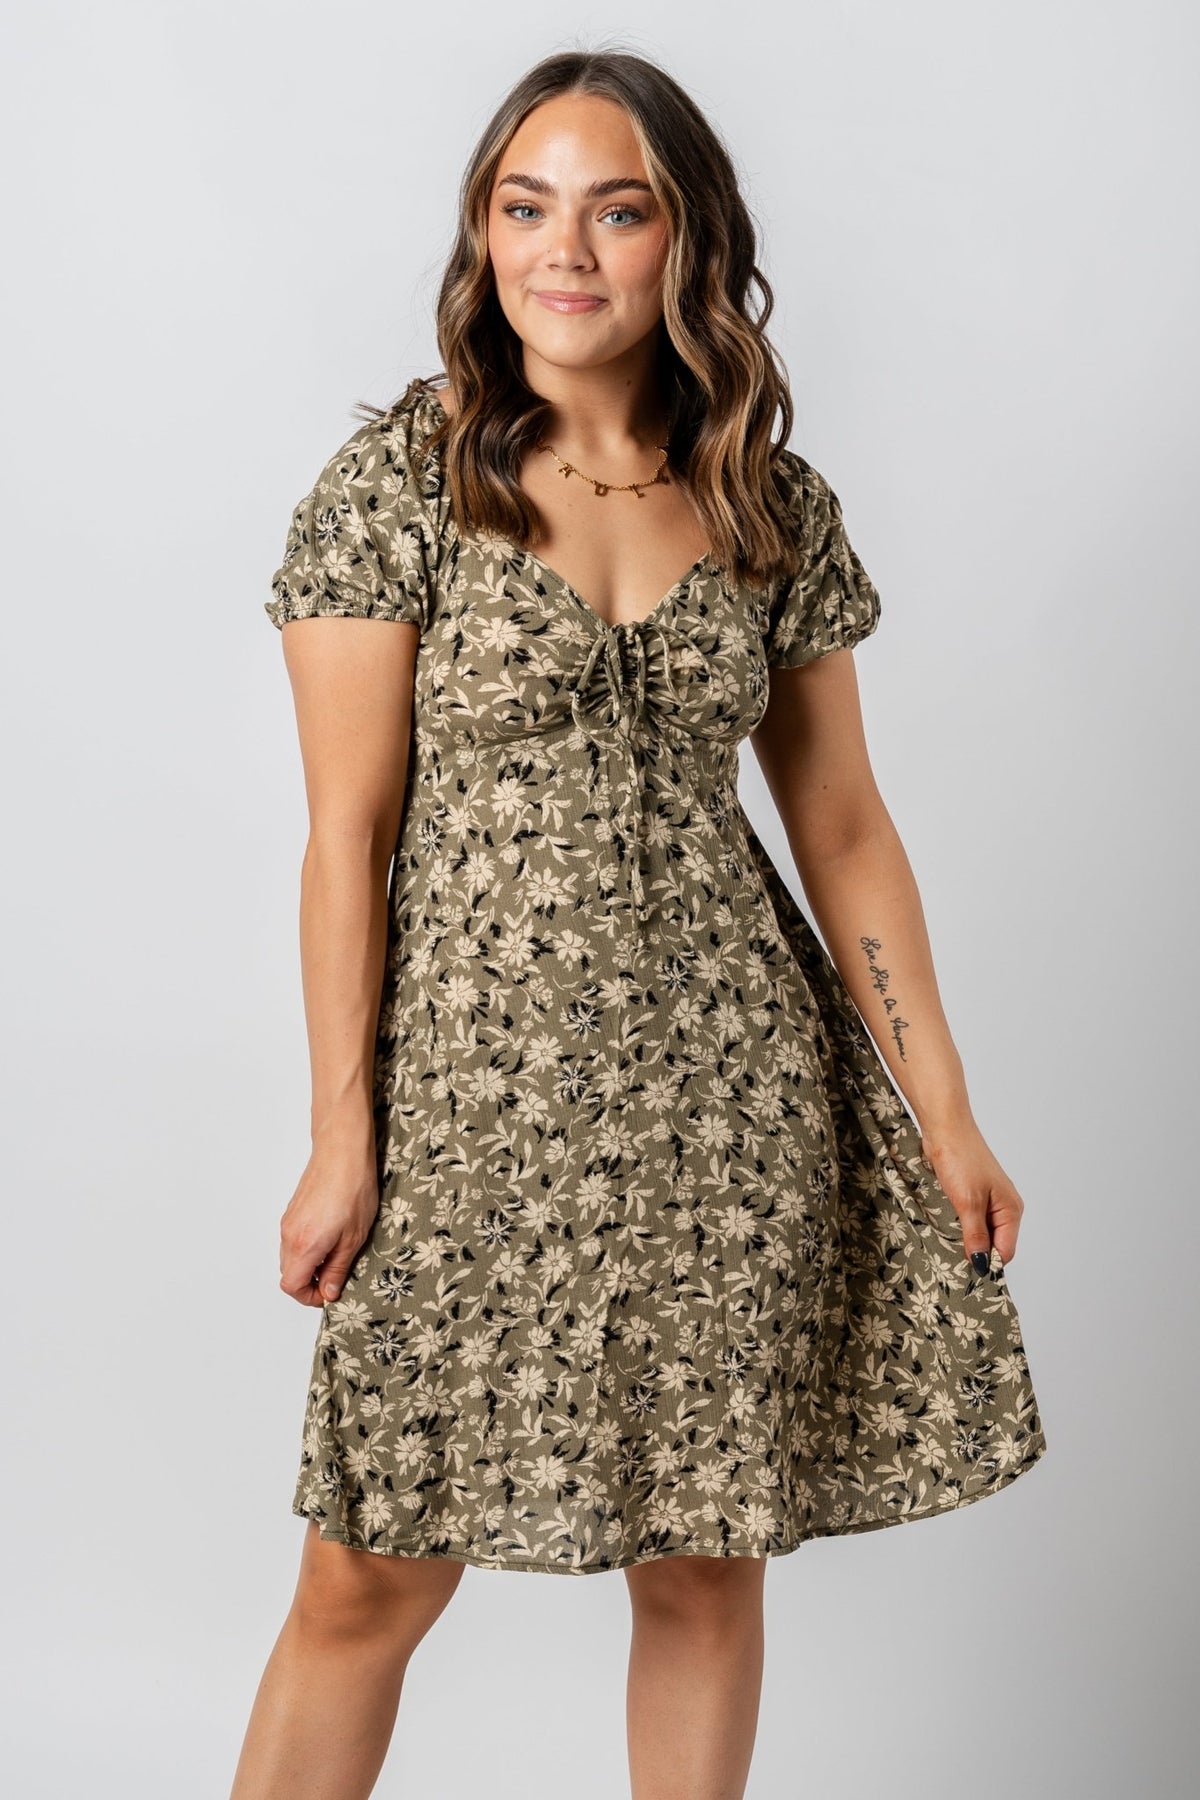 Ruched floral midi dress olive - Cute Dresses - Trendy Dresses at Lush Fashion Lounge Boutique in Oklahoma City